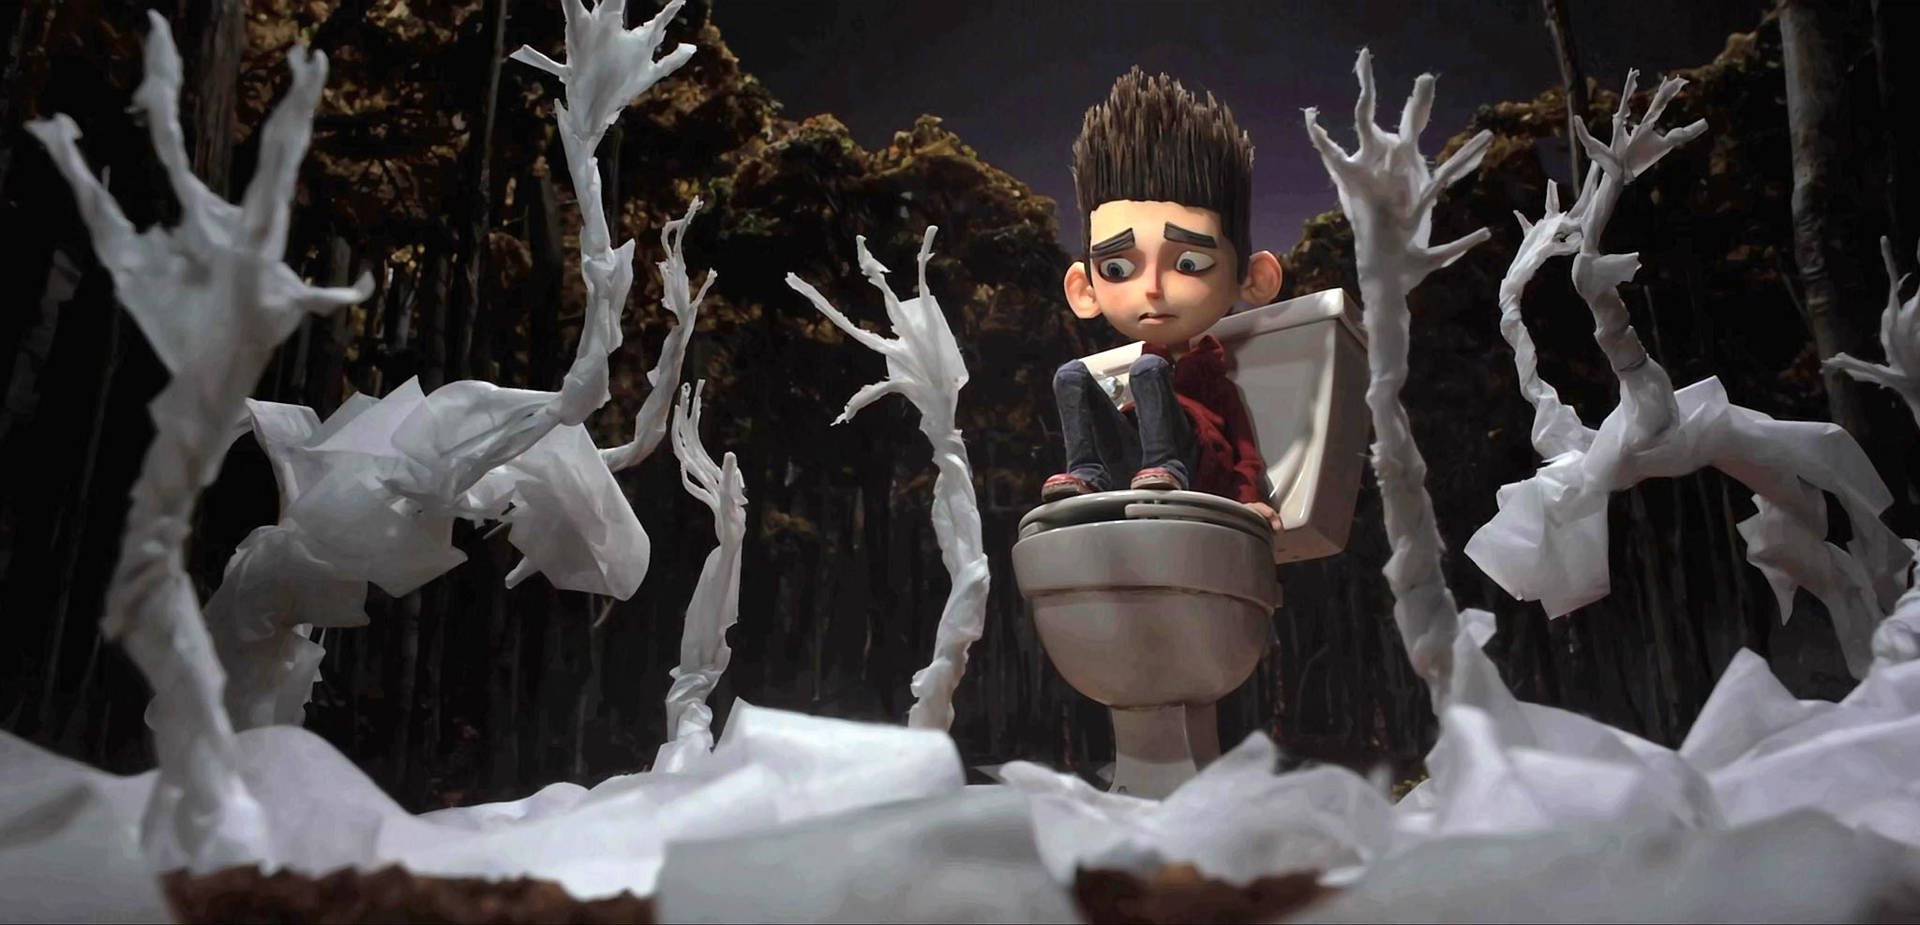 Norman On The Toilet ParaNorman Wallpaper